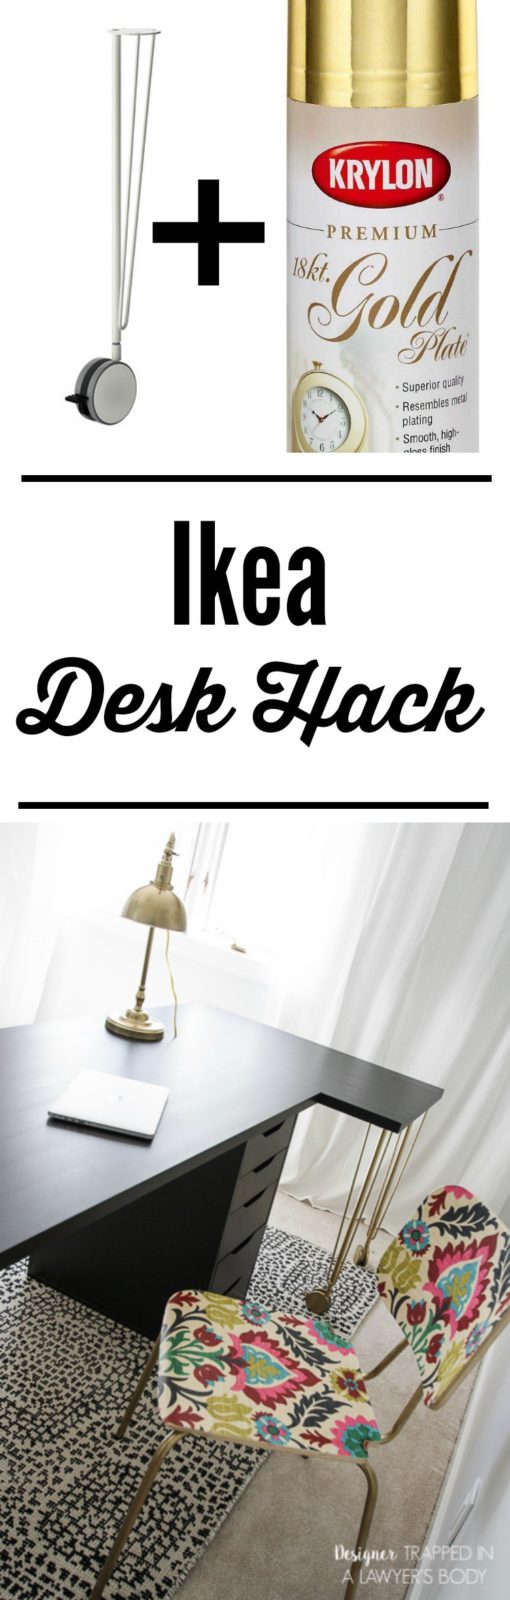 WOW! You would never know this is an Ikea desk hack! Talk about a designer look on a budget. Another fantastic Ikea hack by Designer Trapped in a Lawyer's Body.